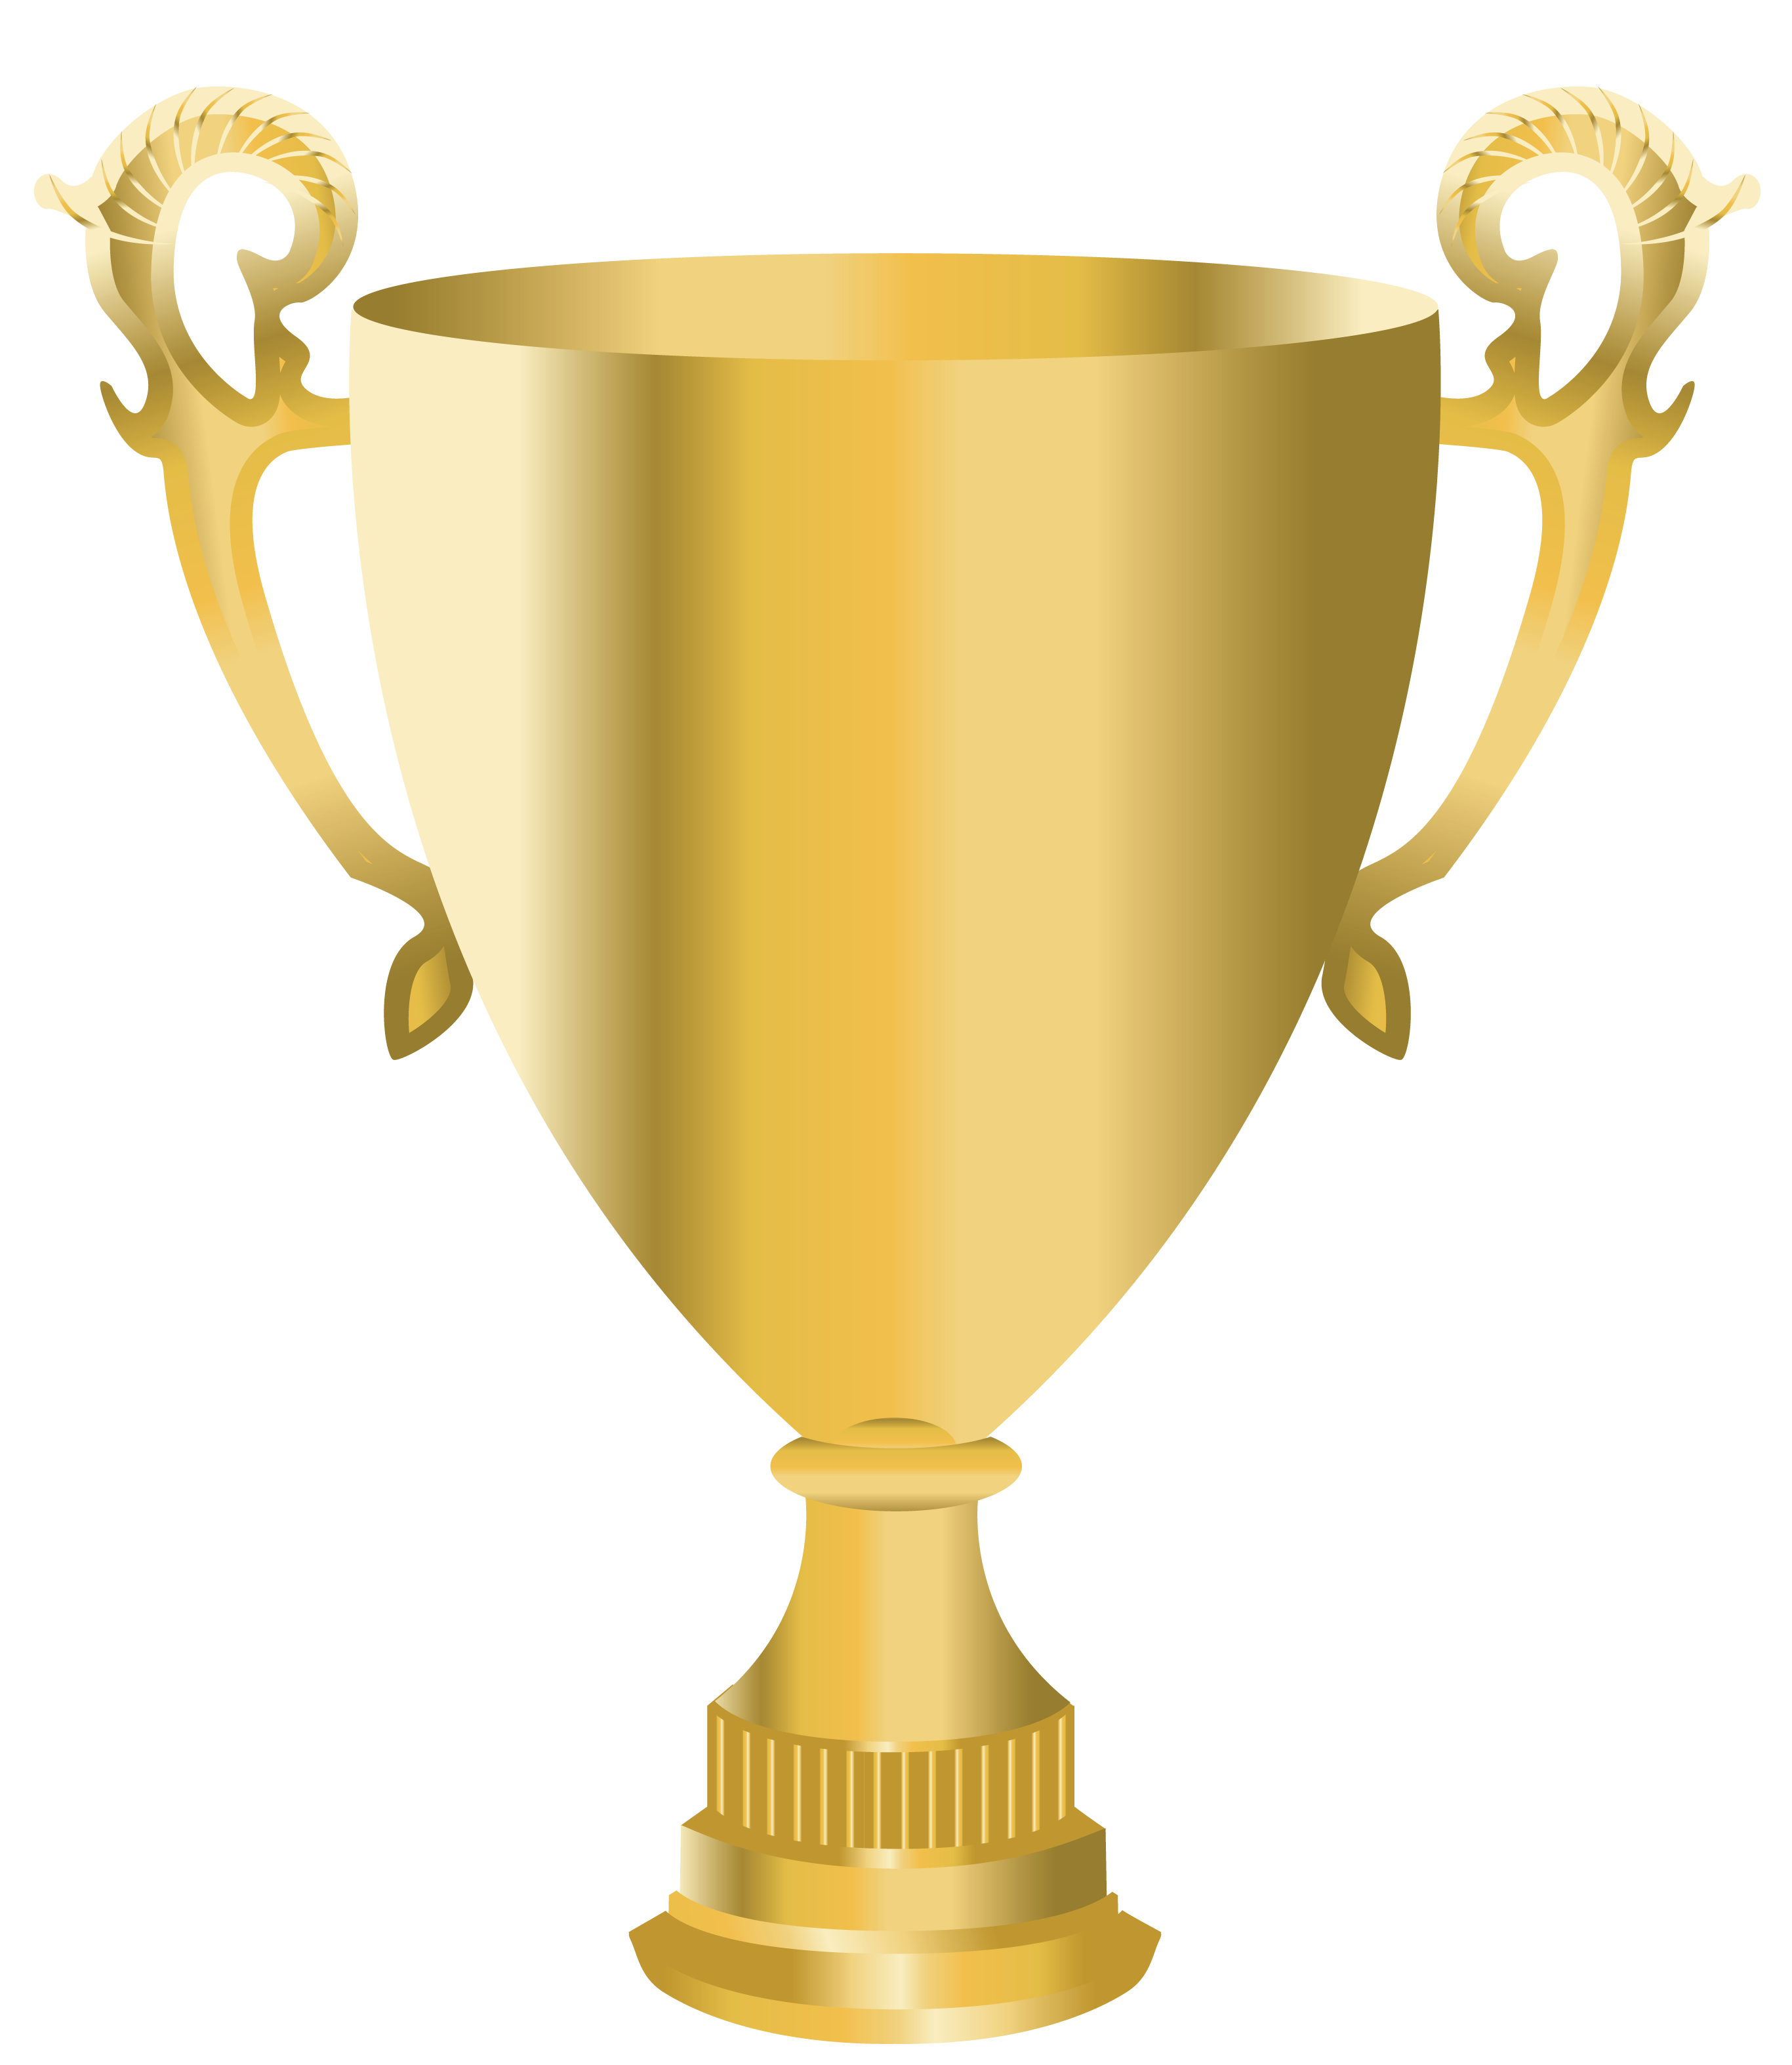 Golden cup trophy picture clipart